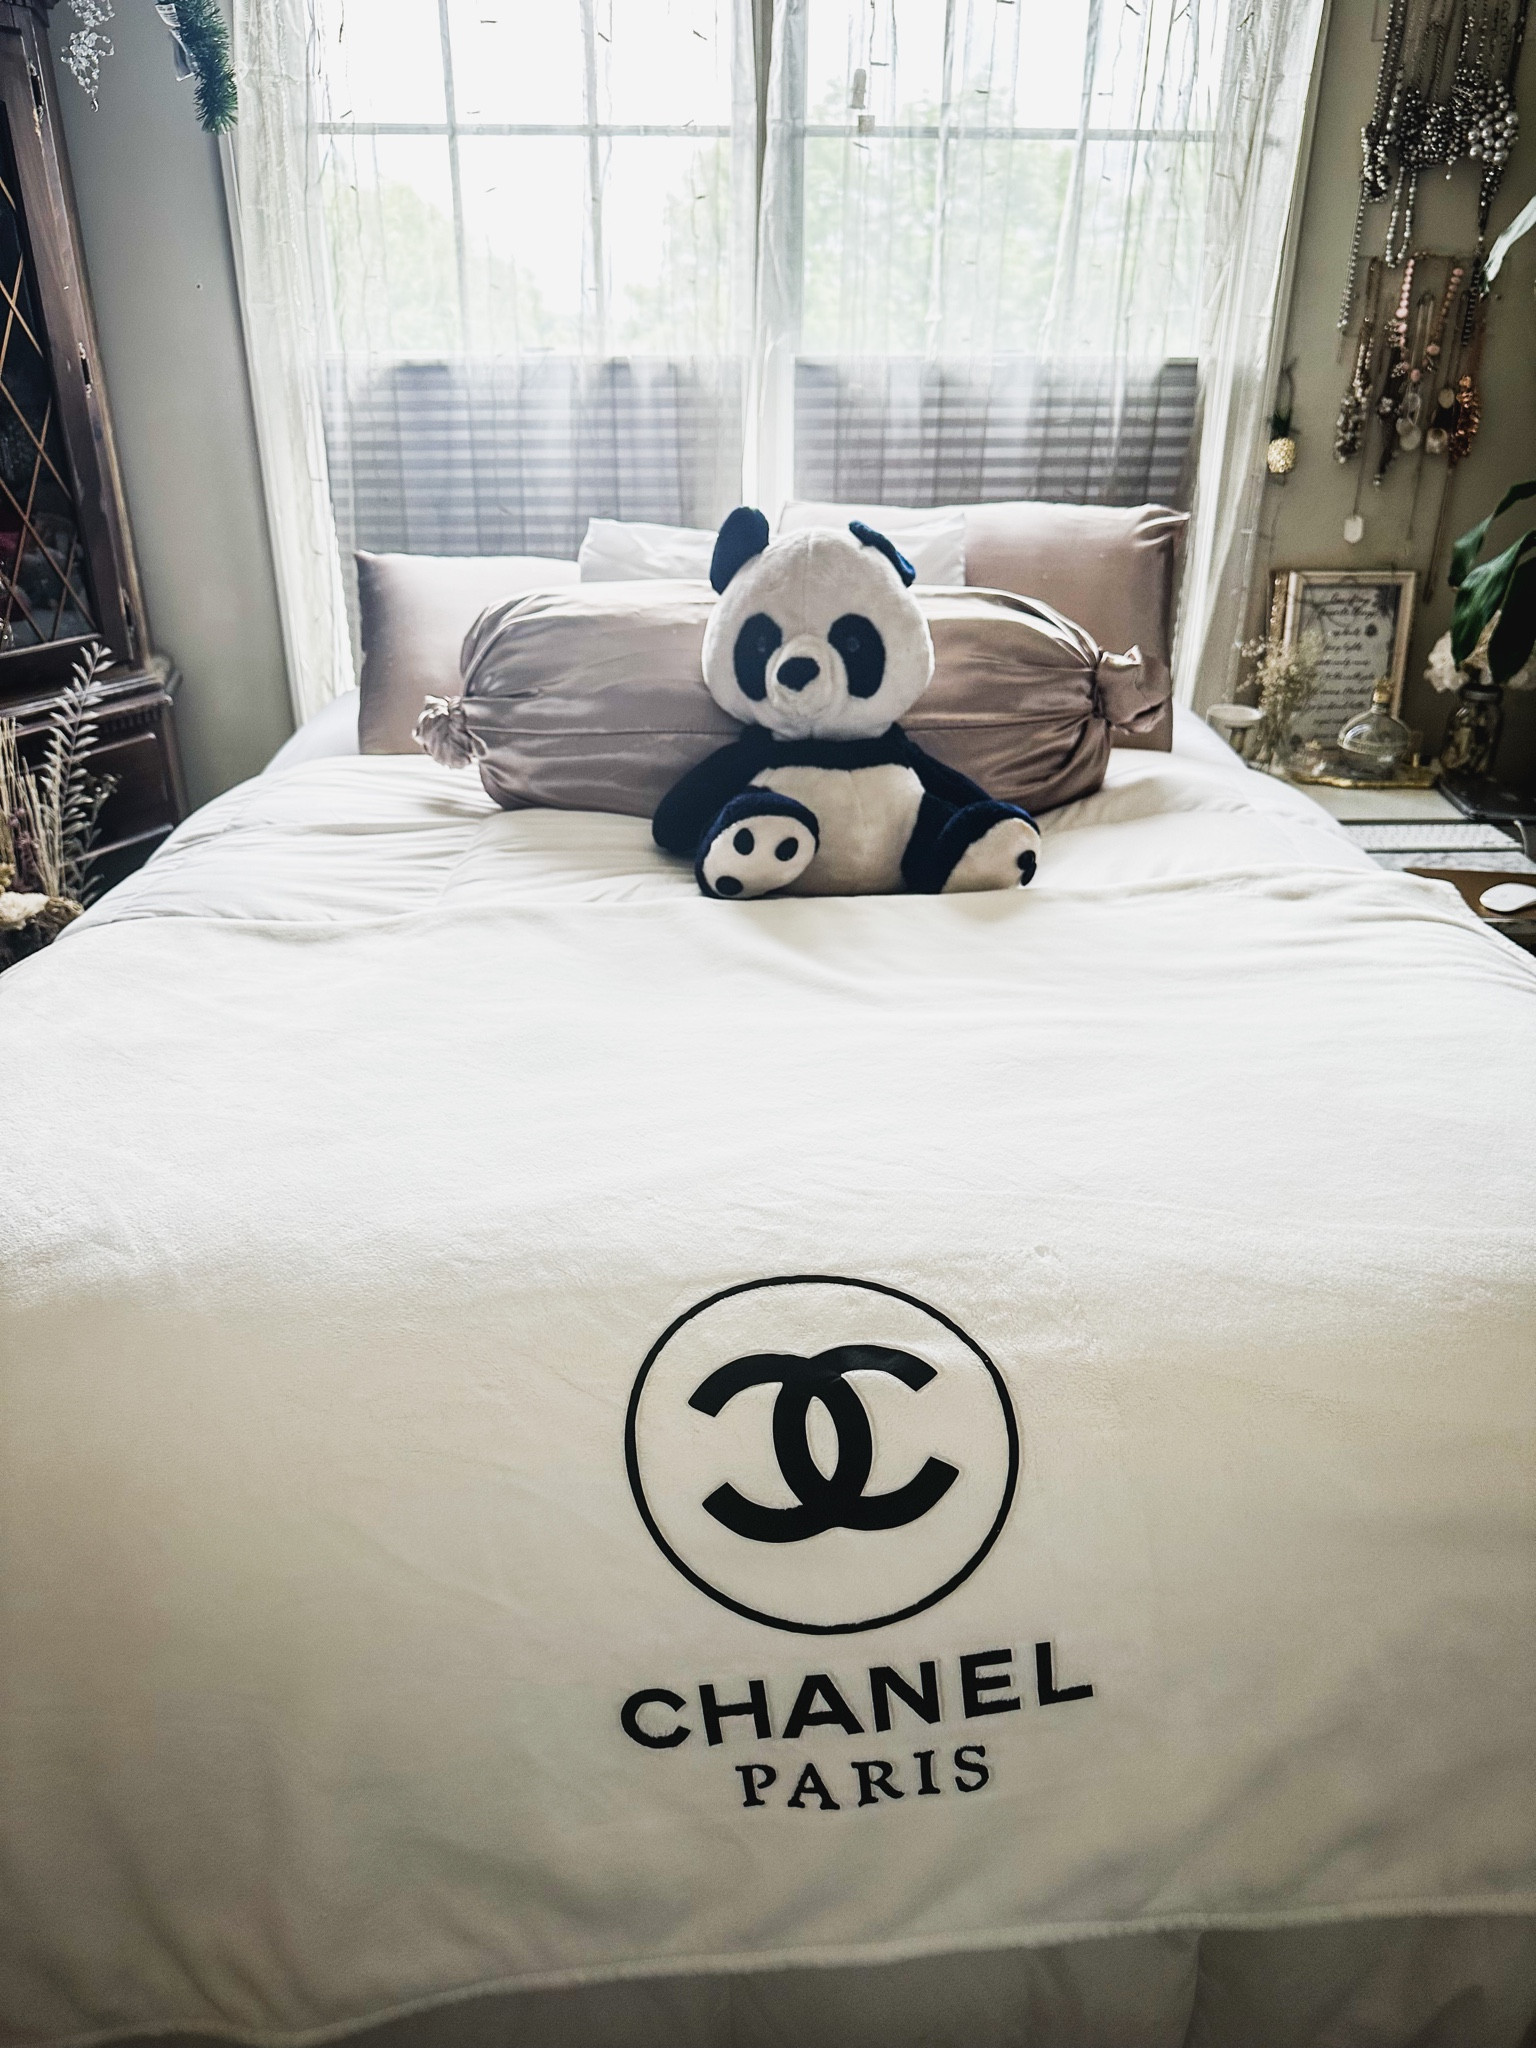 I will sleep like a baby with Beckham Hotel Collection comforter and g